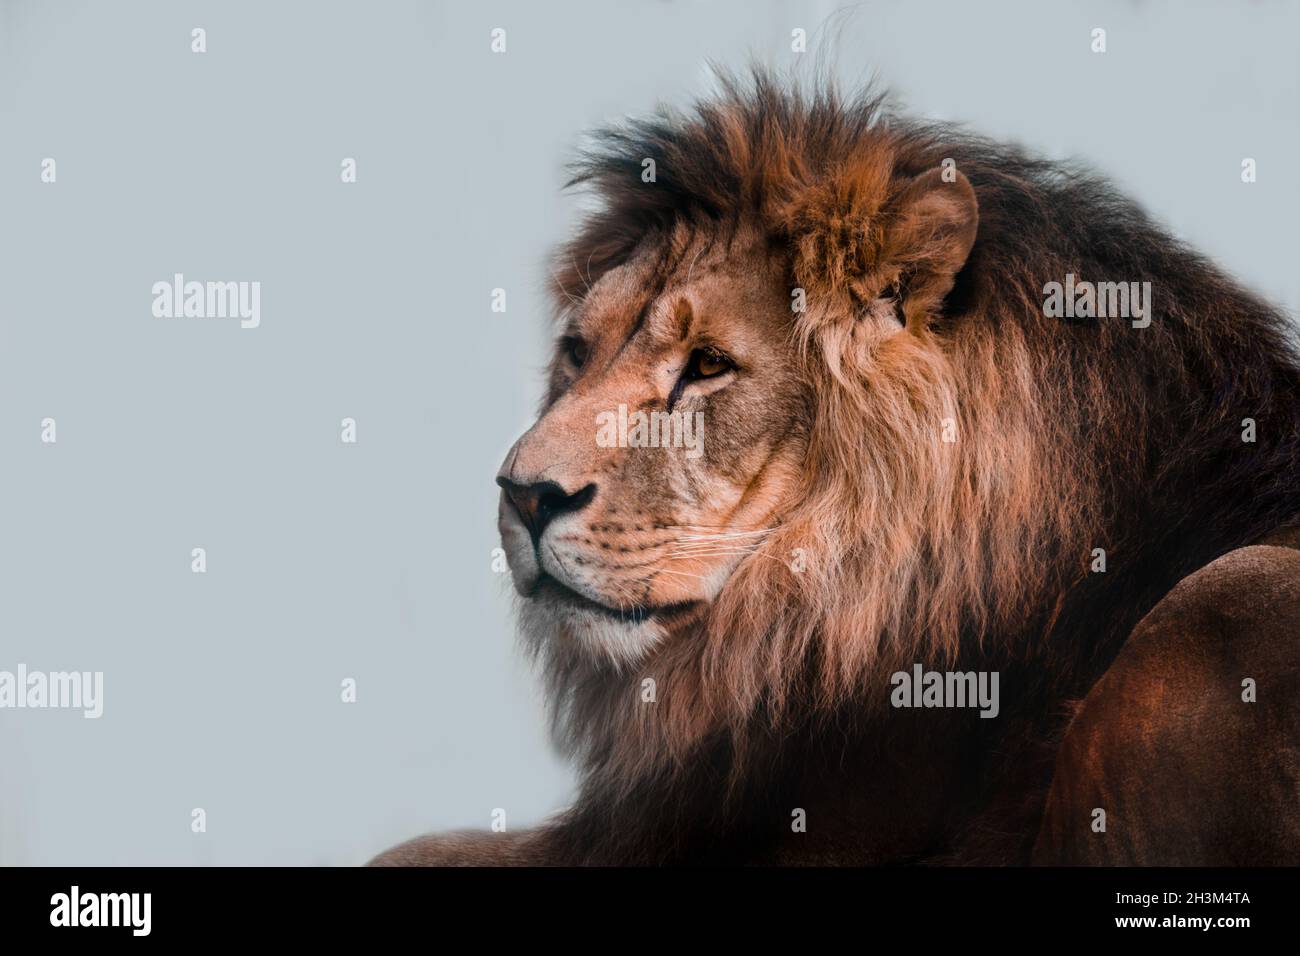 Lion head. Lion on a light background. A proud and noble lion. Stock Photo